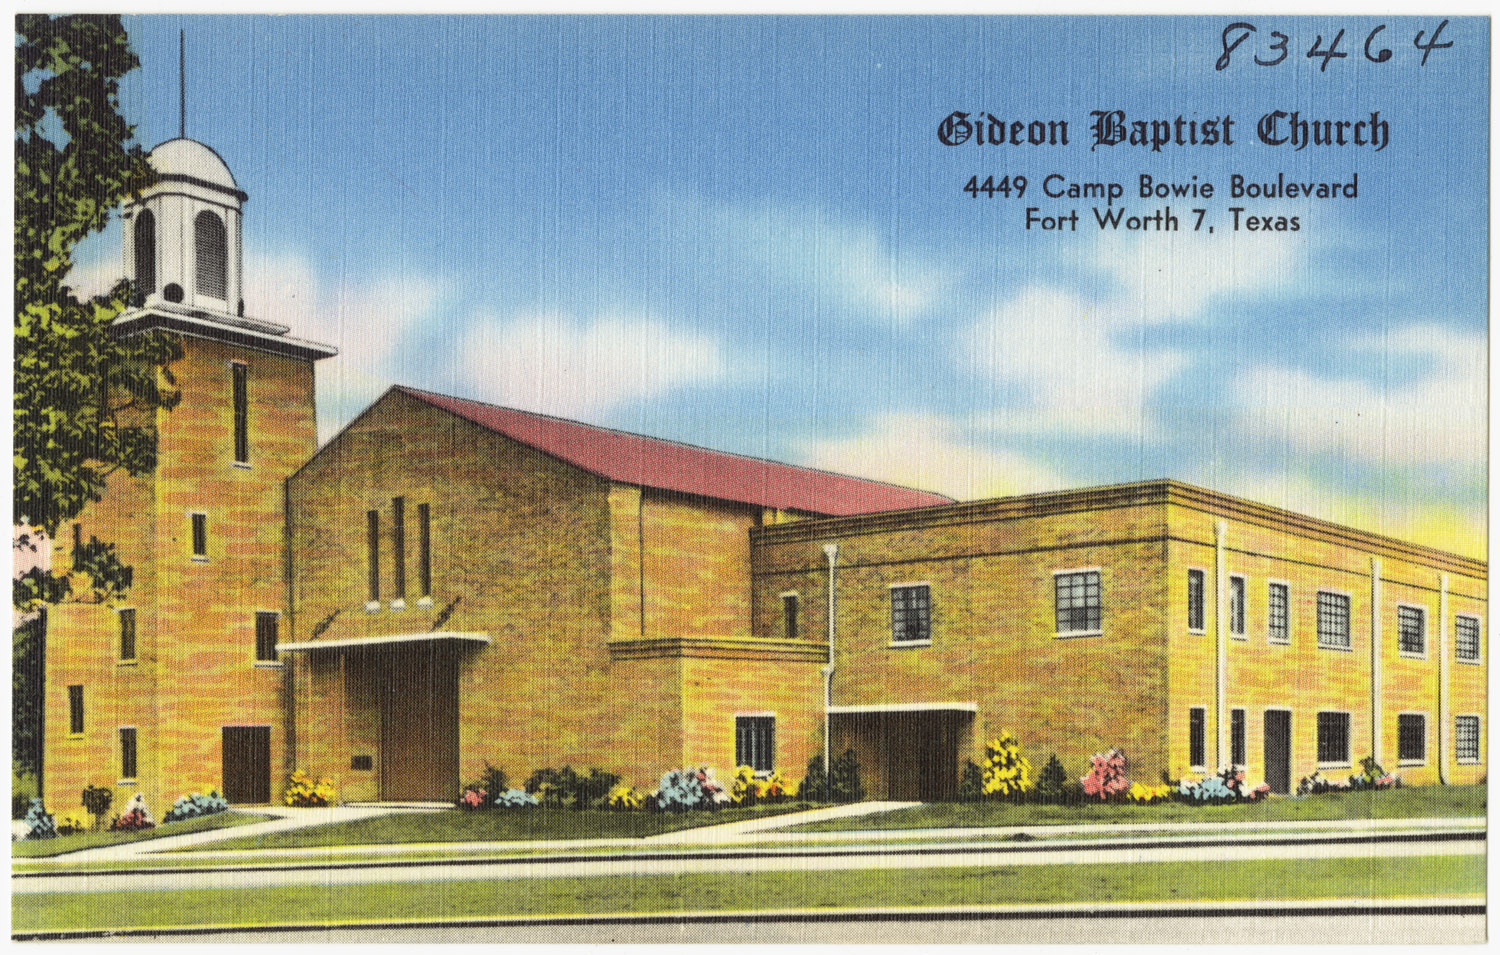 a postcard that shows the exterior of a building with a steeple